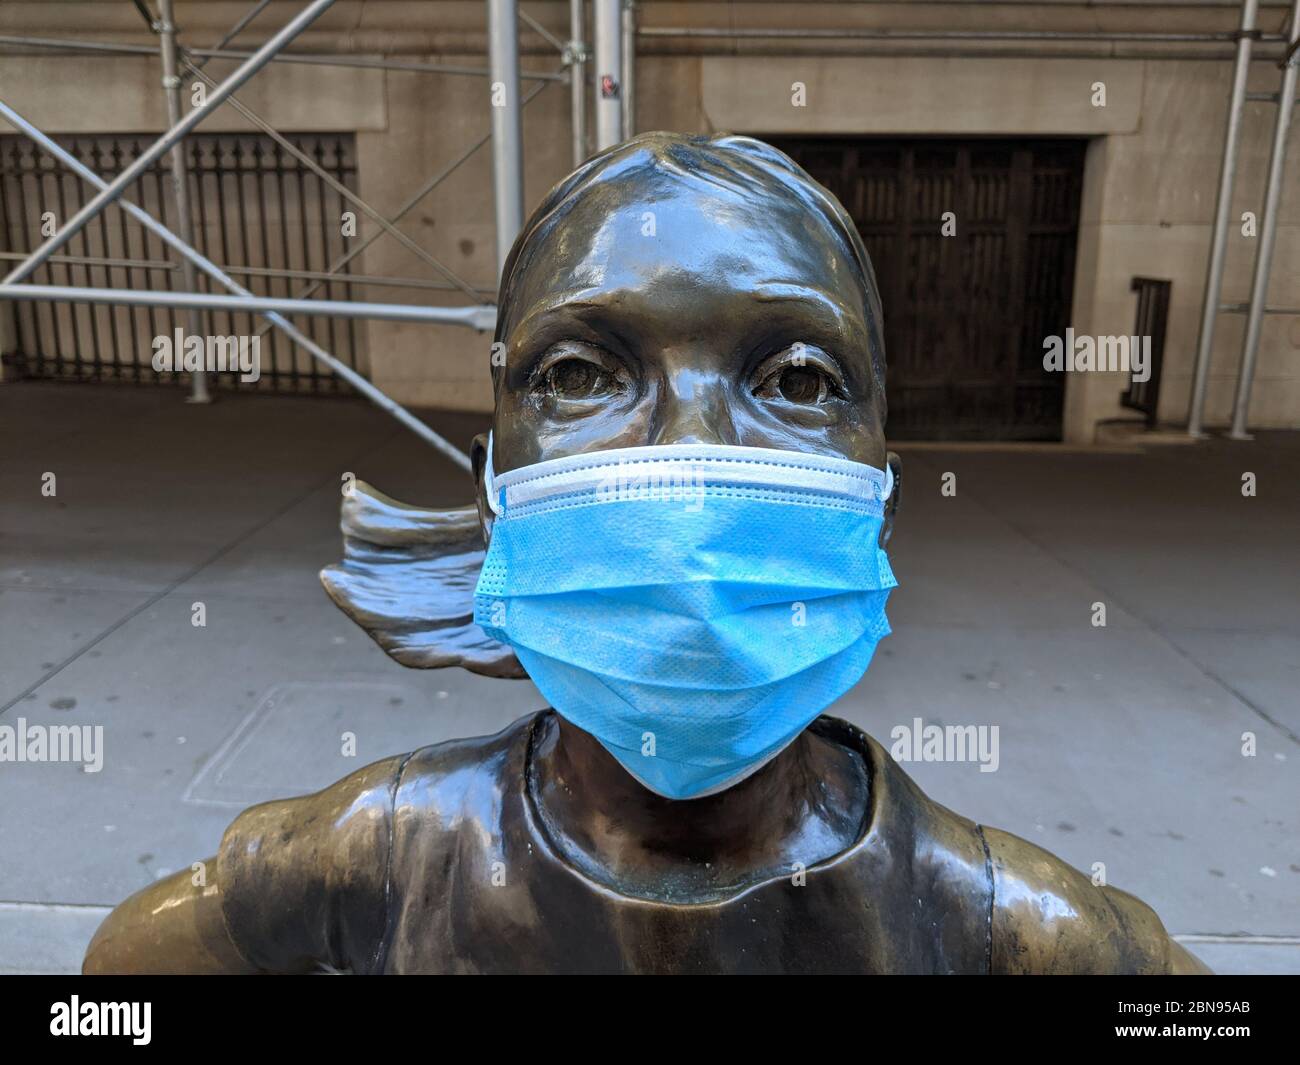 The Fearless Girl Statue with a mask during the coronavirus pandemic in New York City. Stock Photo